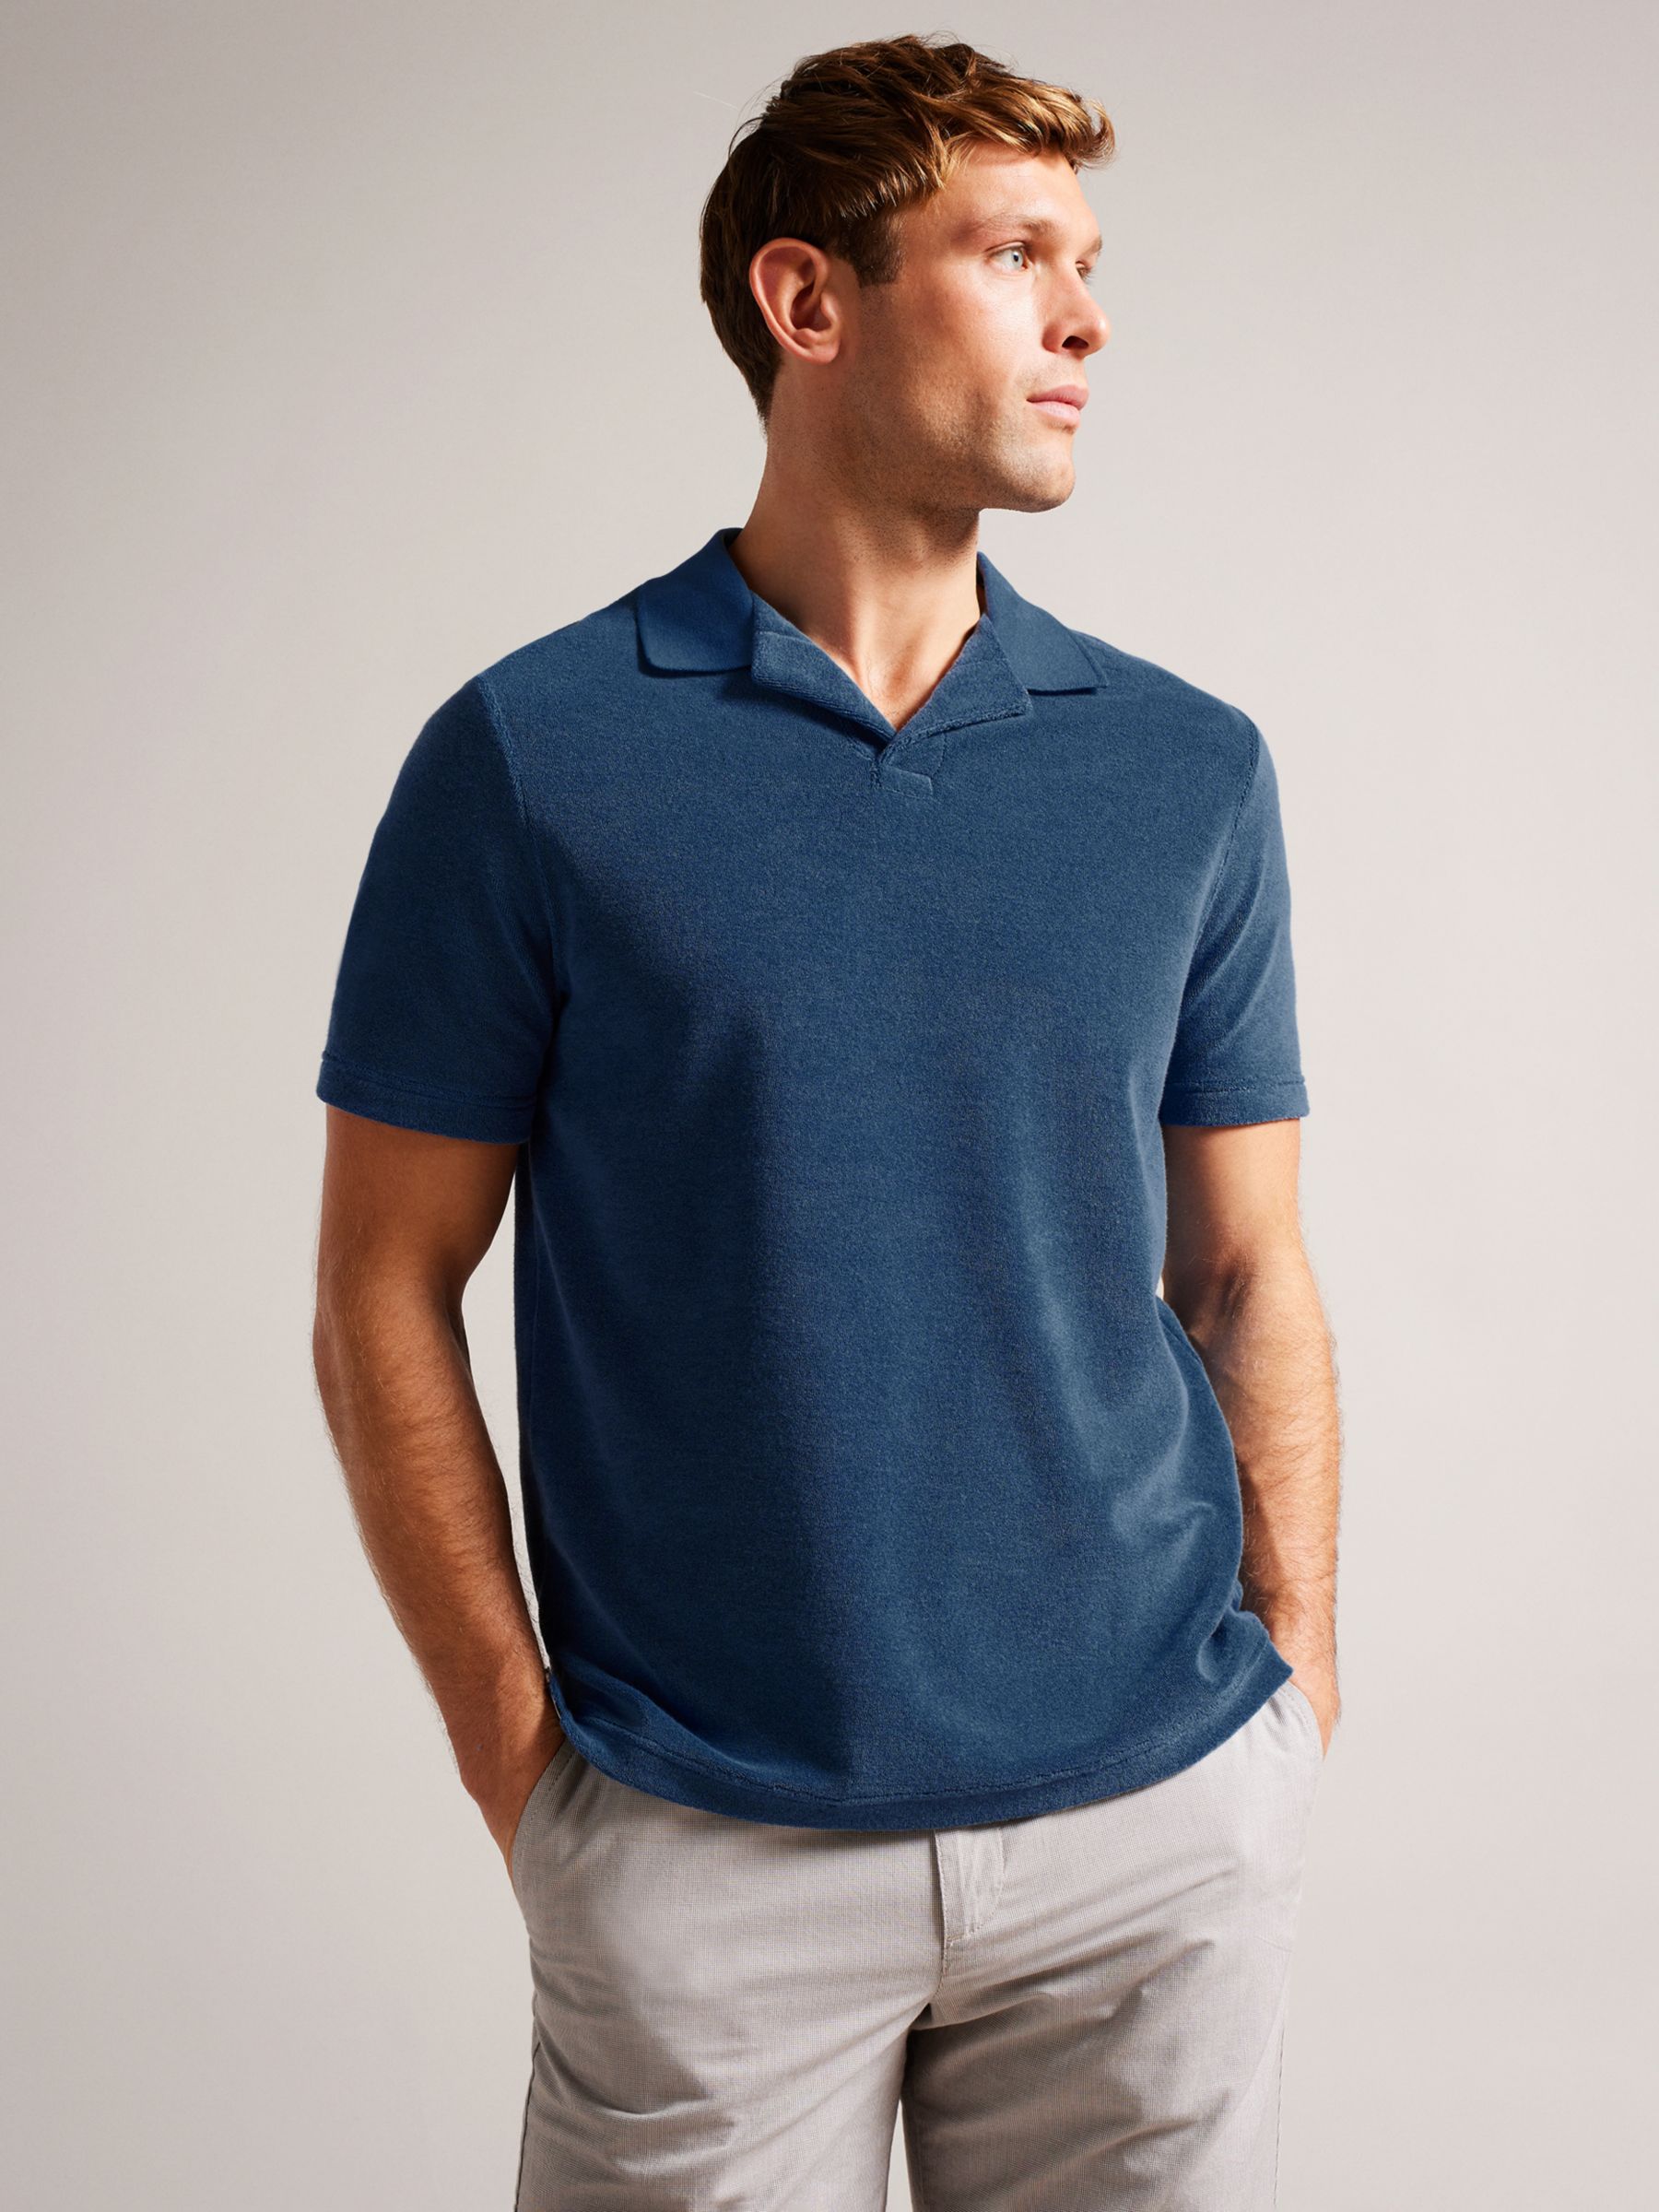 Ted Baker Short Sleeved Towelling Polo, Dark Blue at John Lewis & Partners